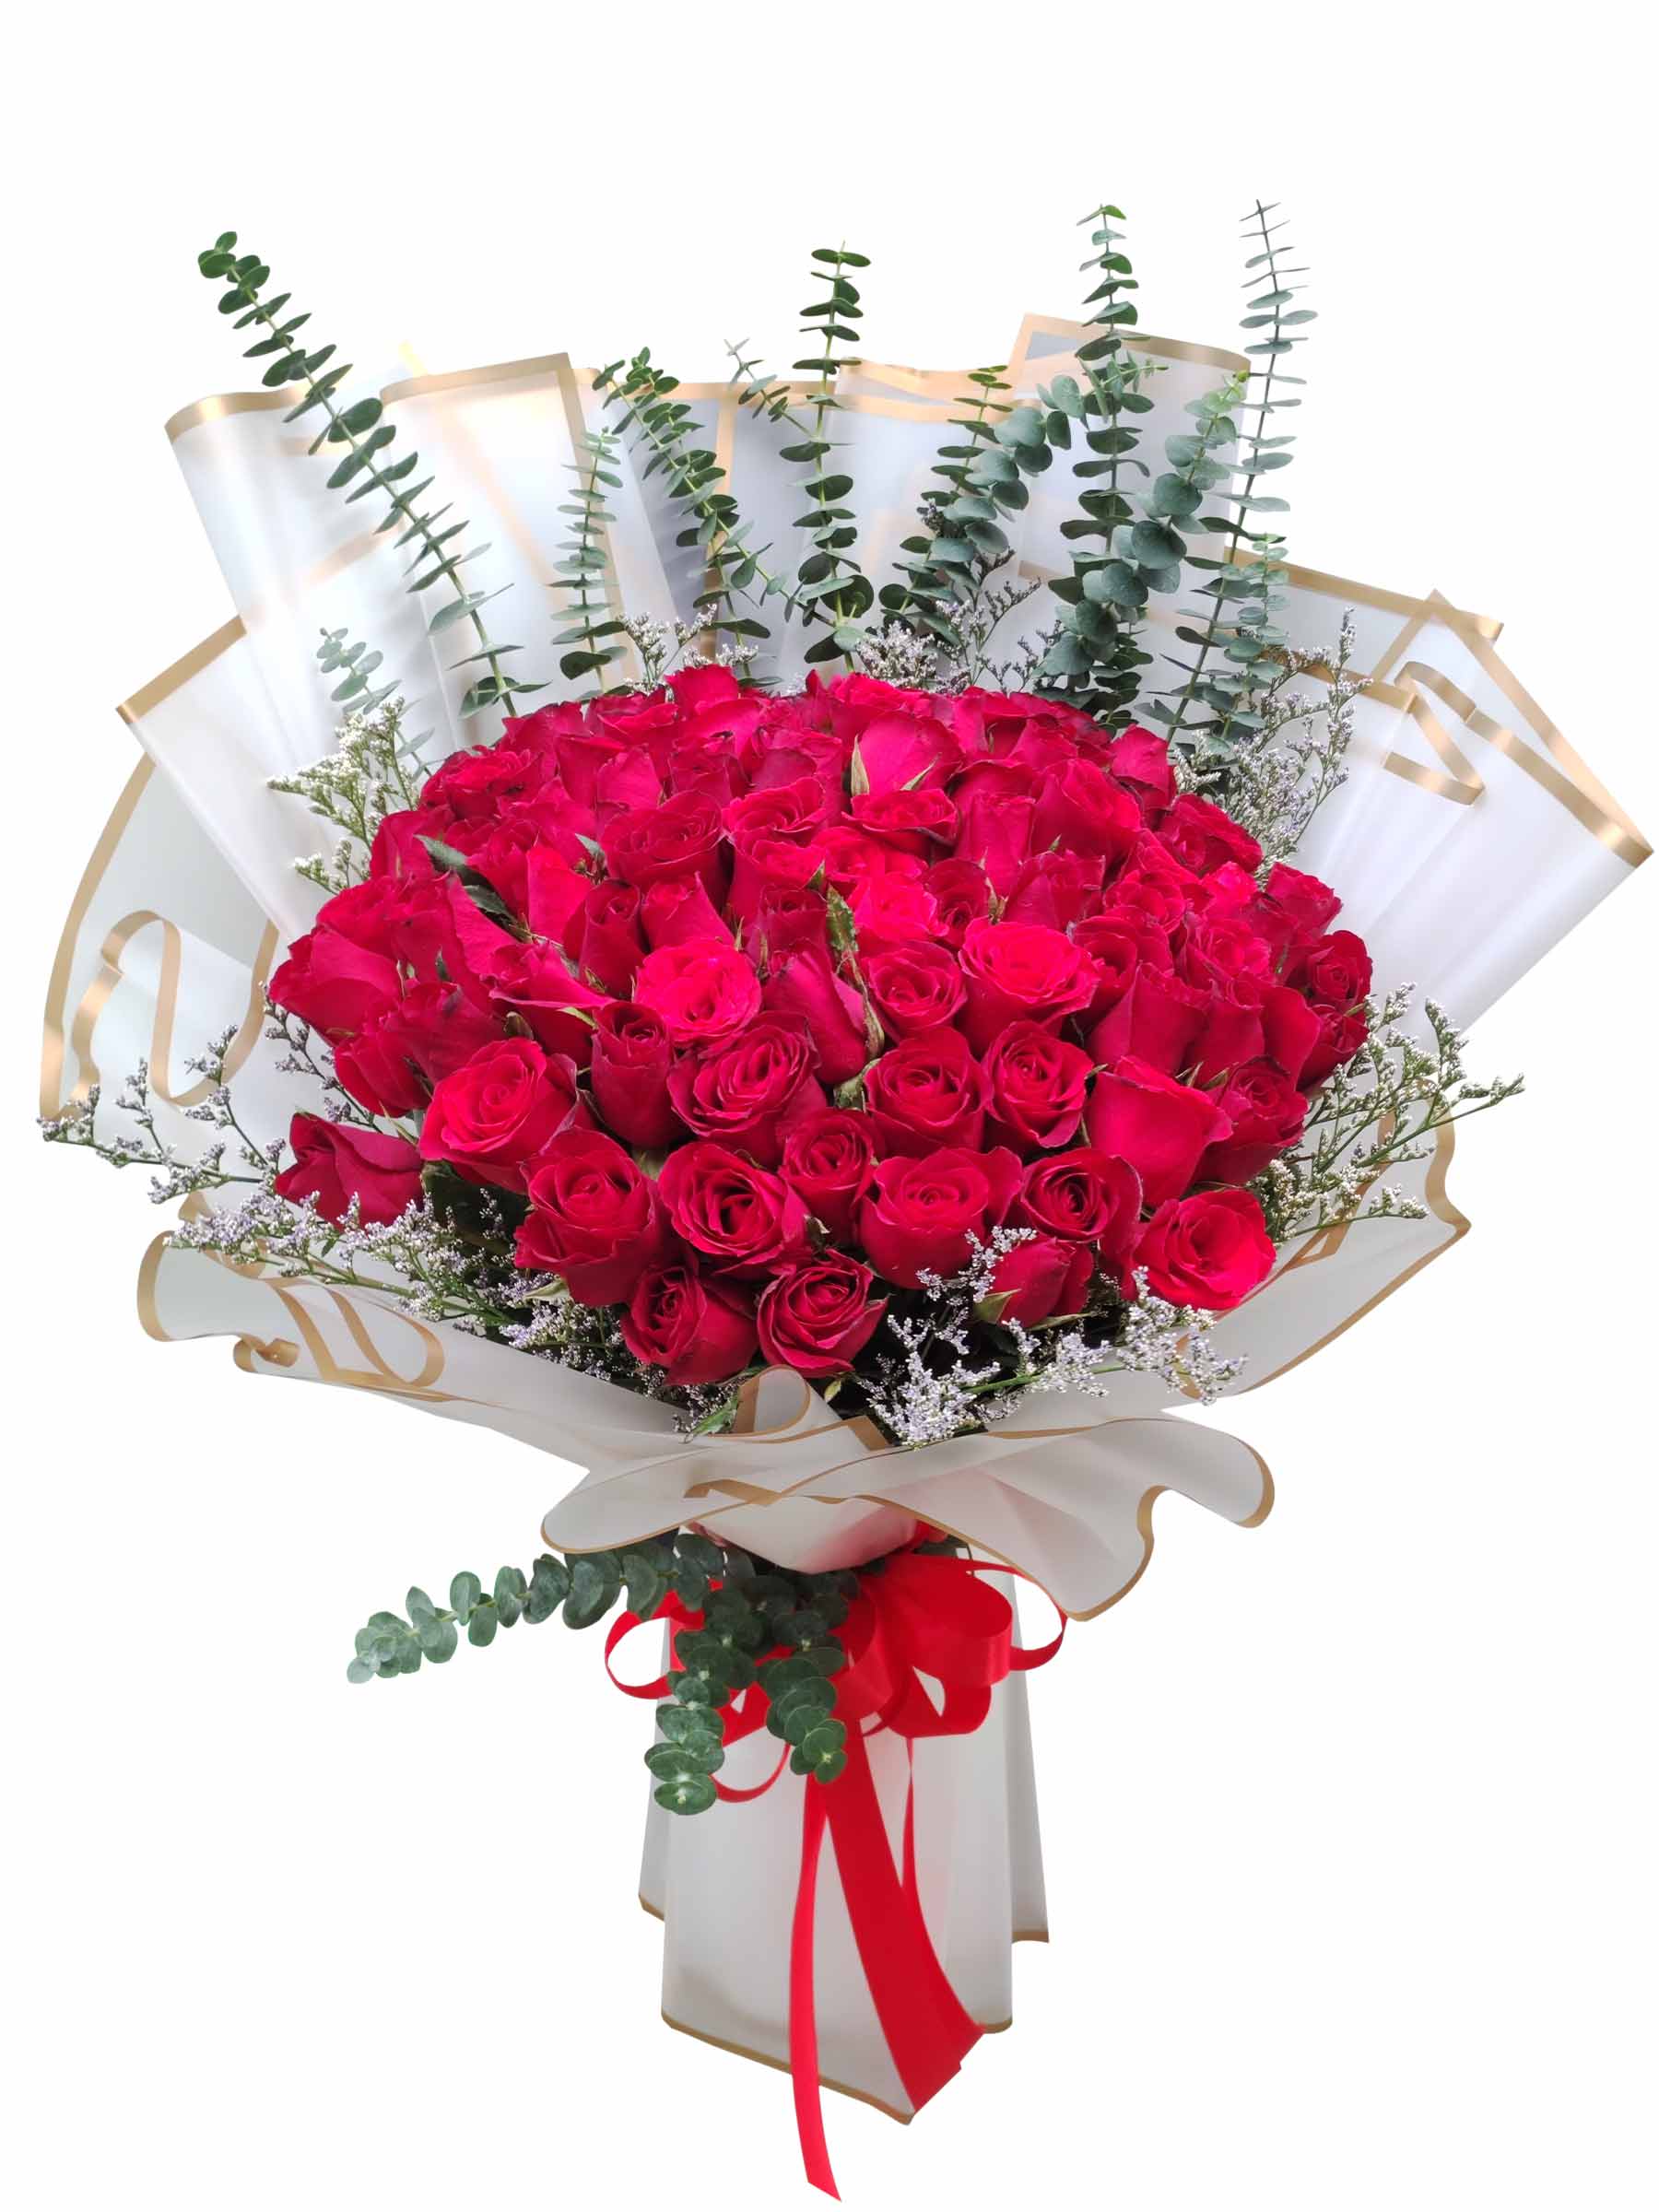 99 pcs red roses, white wrapper